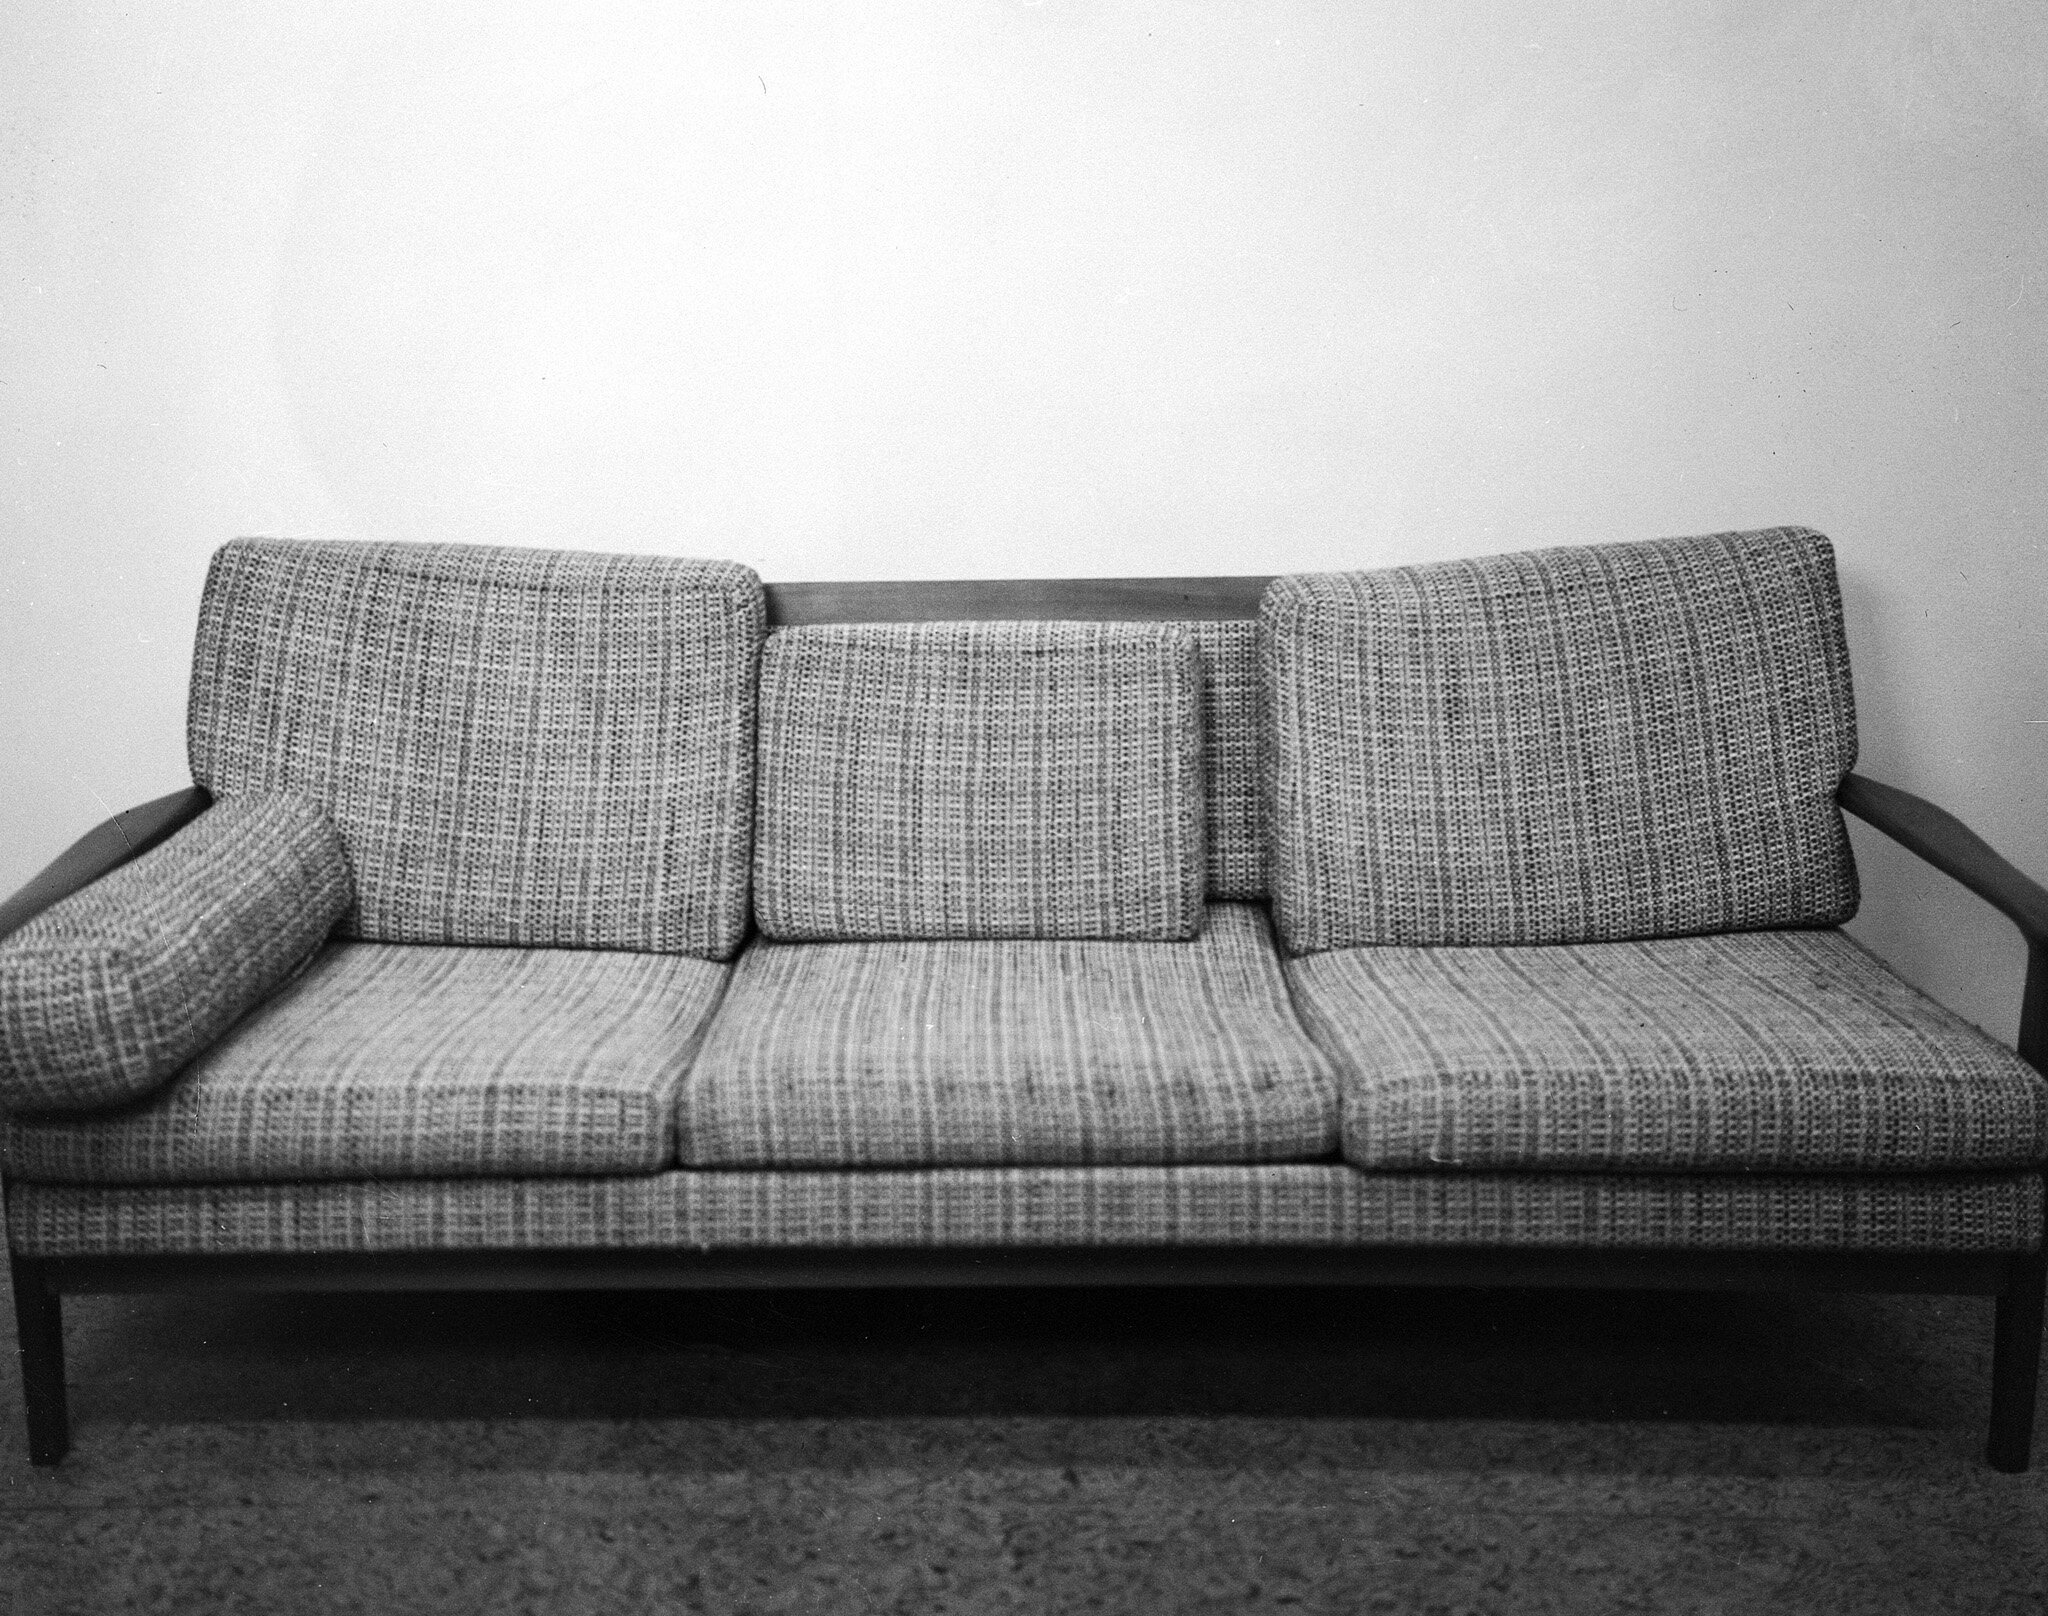 2019_Max_P_Martin_Couch.jpg